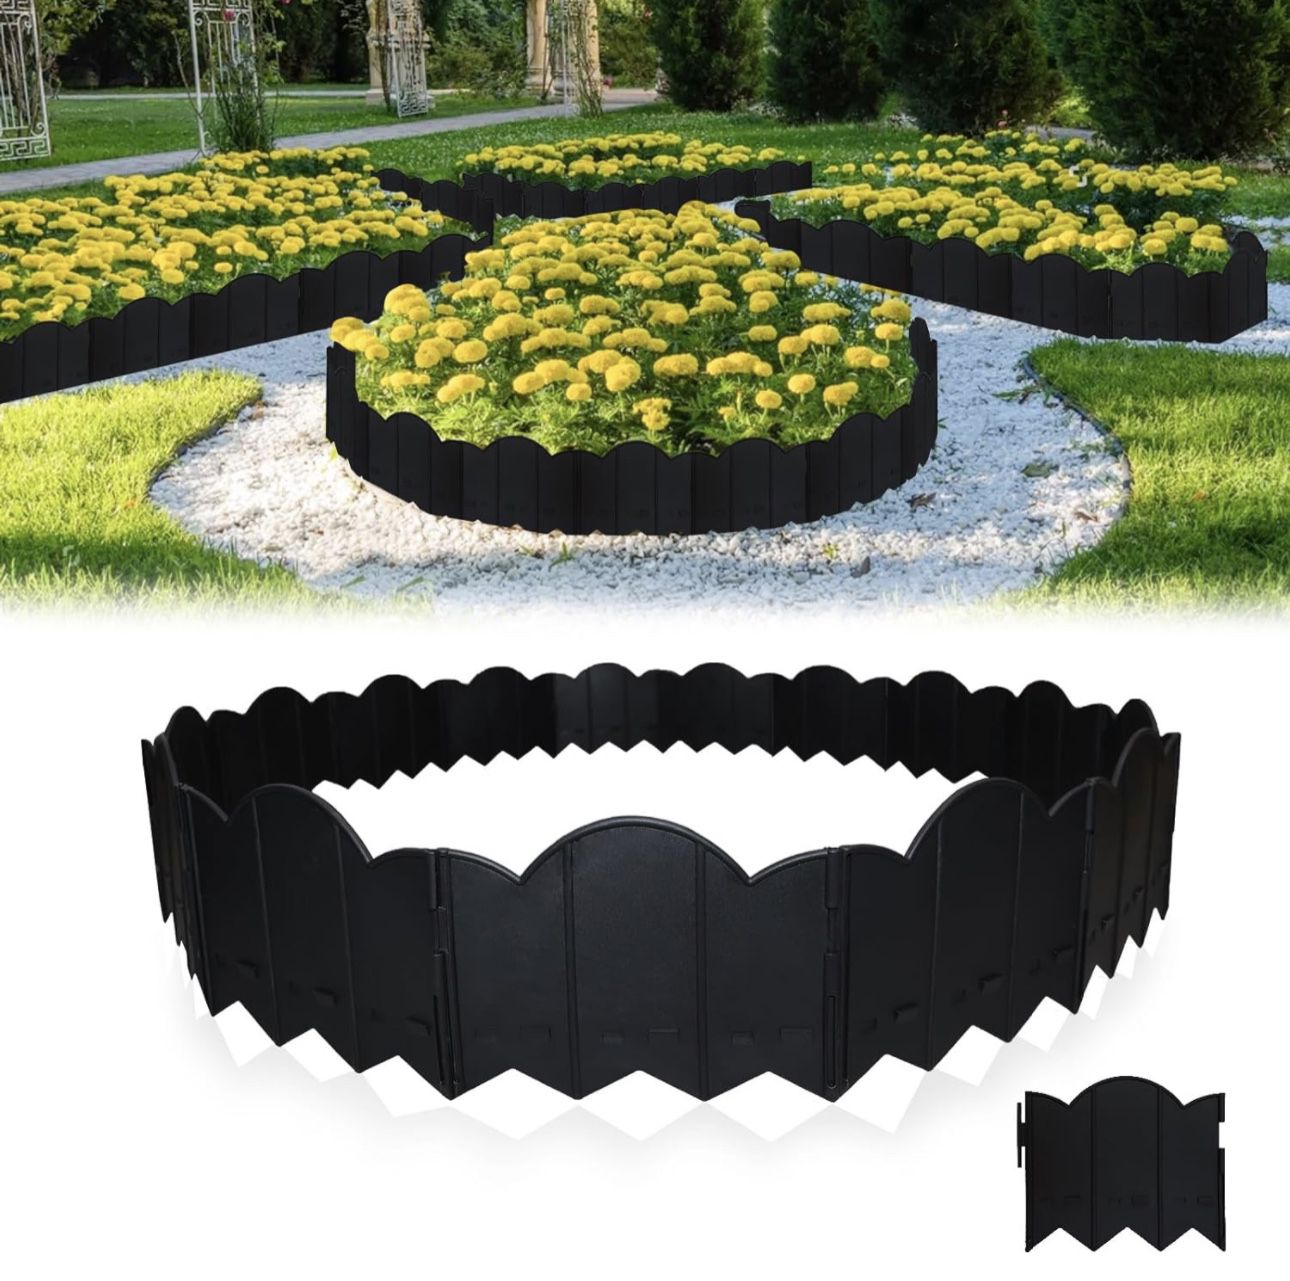 BRAND NEW 20.6FT Landscape Flower Bed Edging Borders Patio Pathway 30PCS